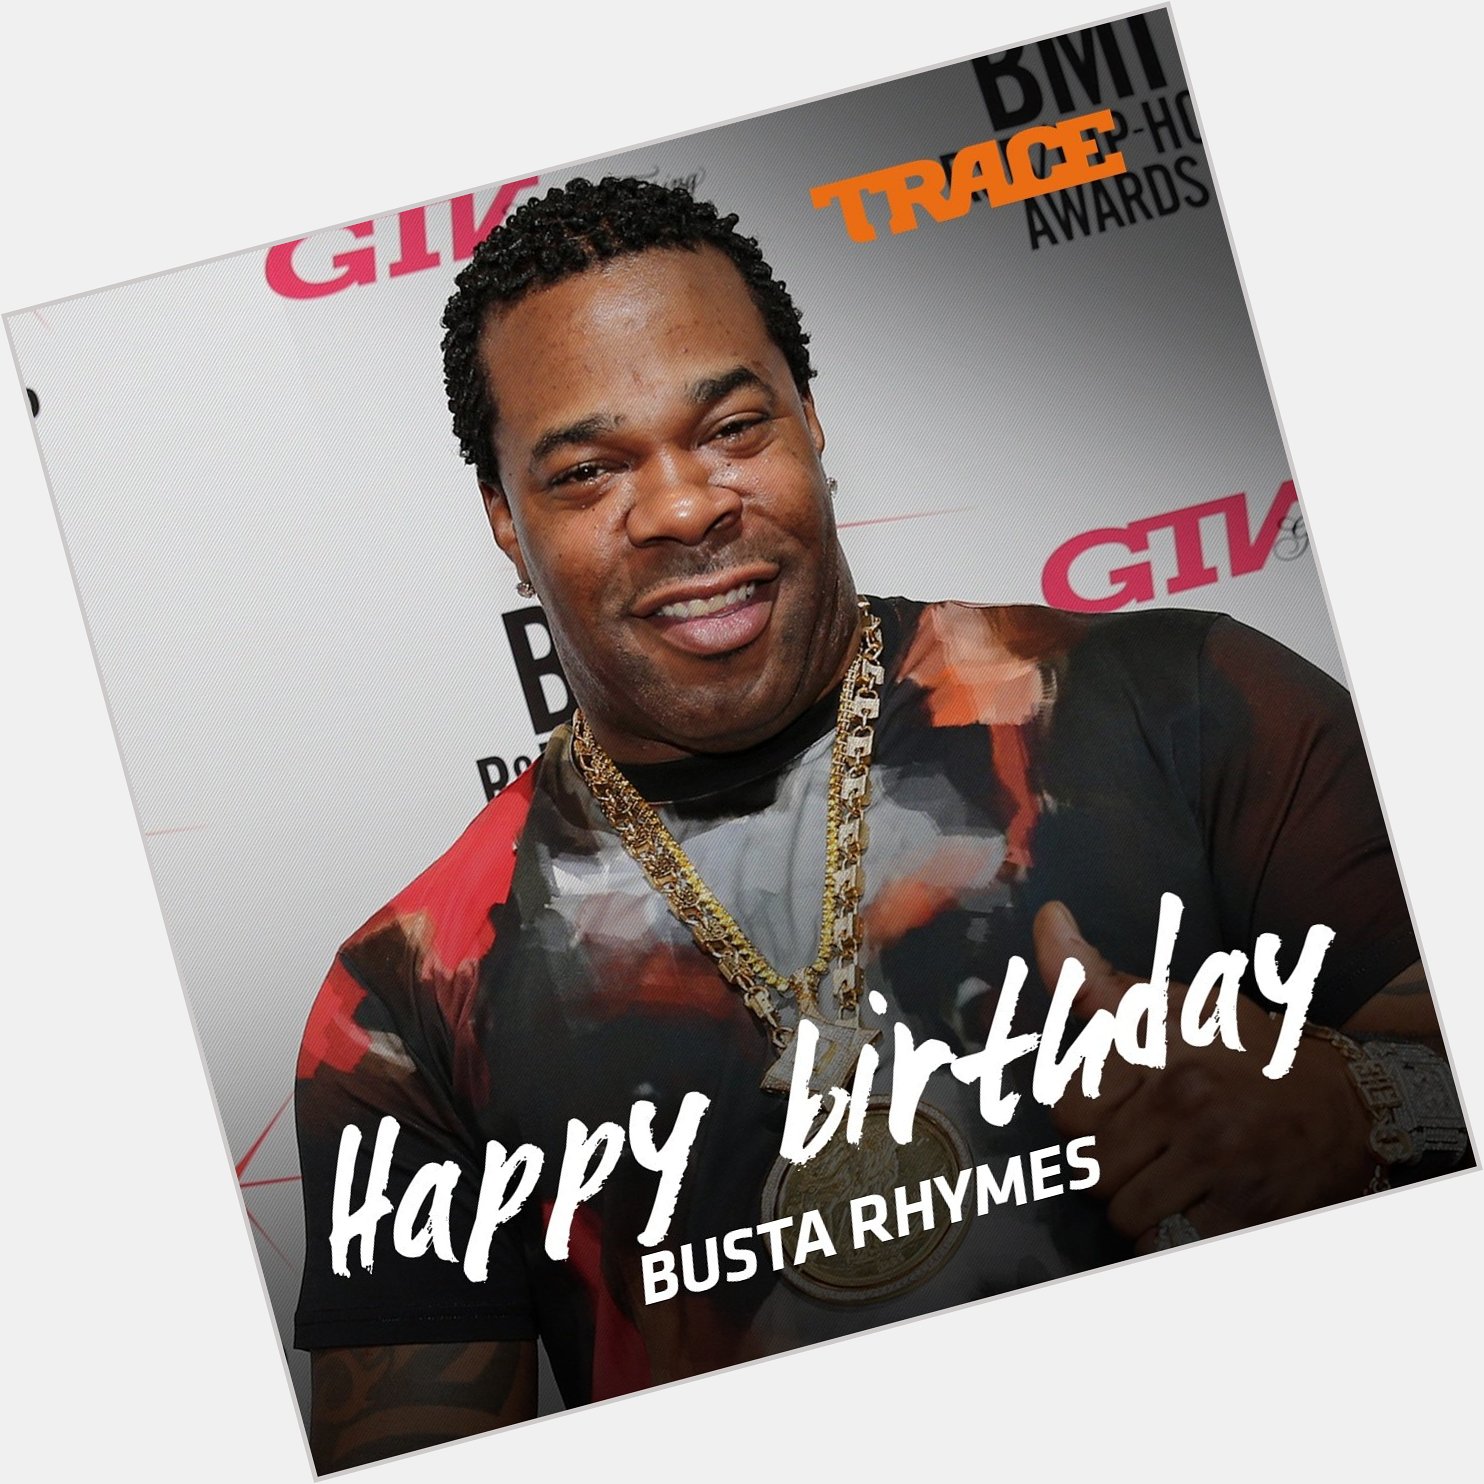 Busta Rhymes! No one can keep up with your rhymes. Happy Birthday from the team! 